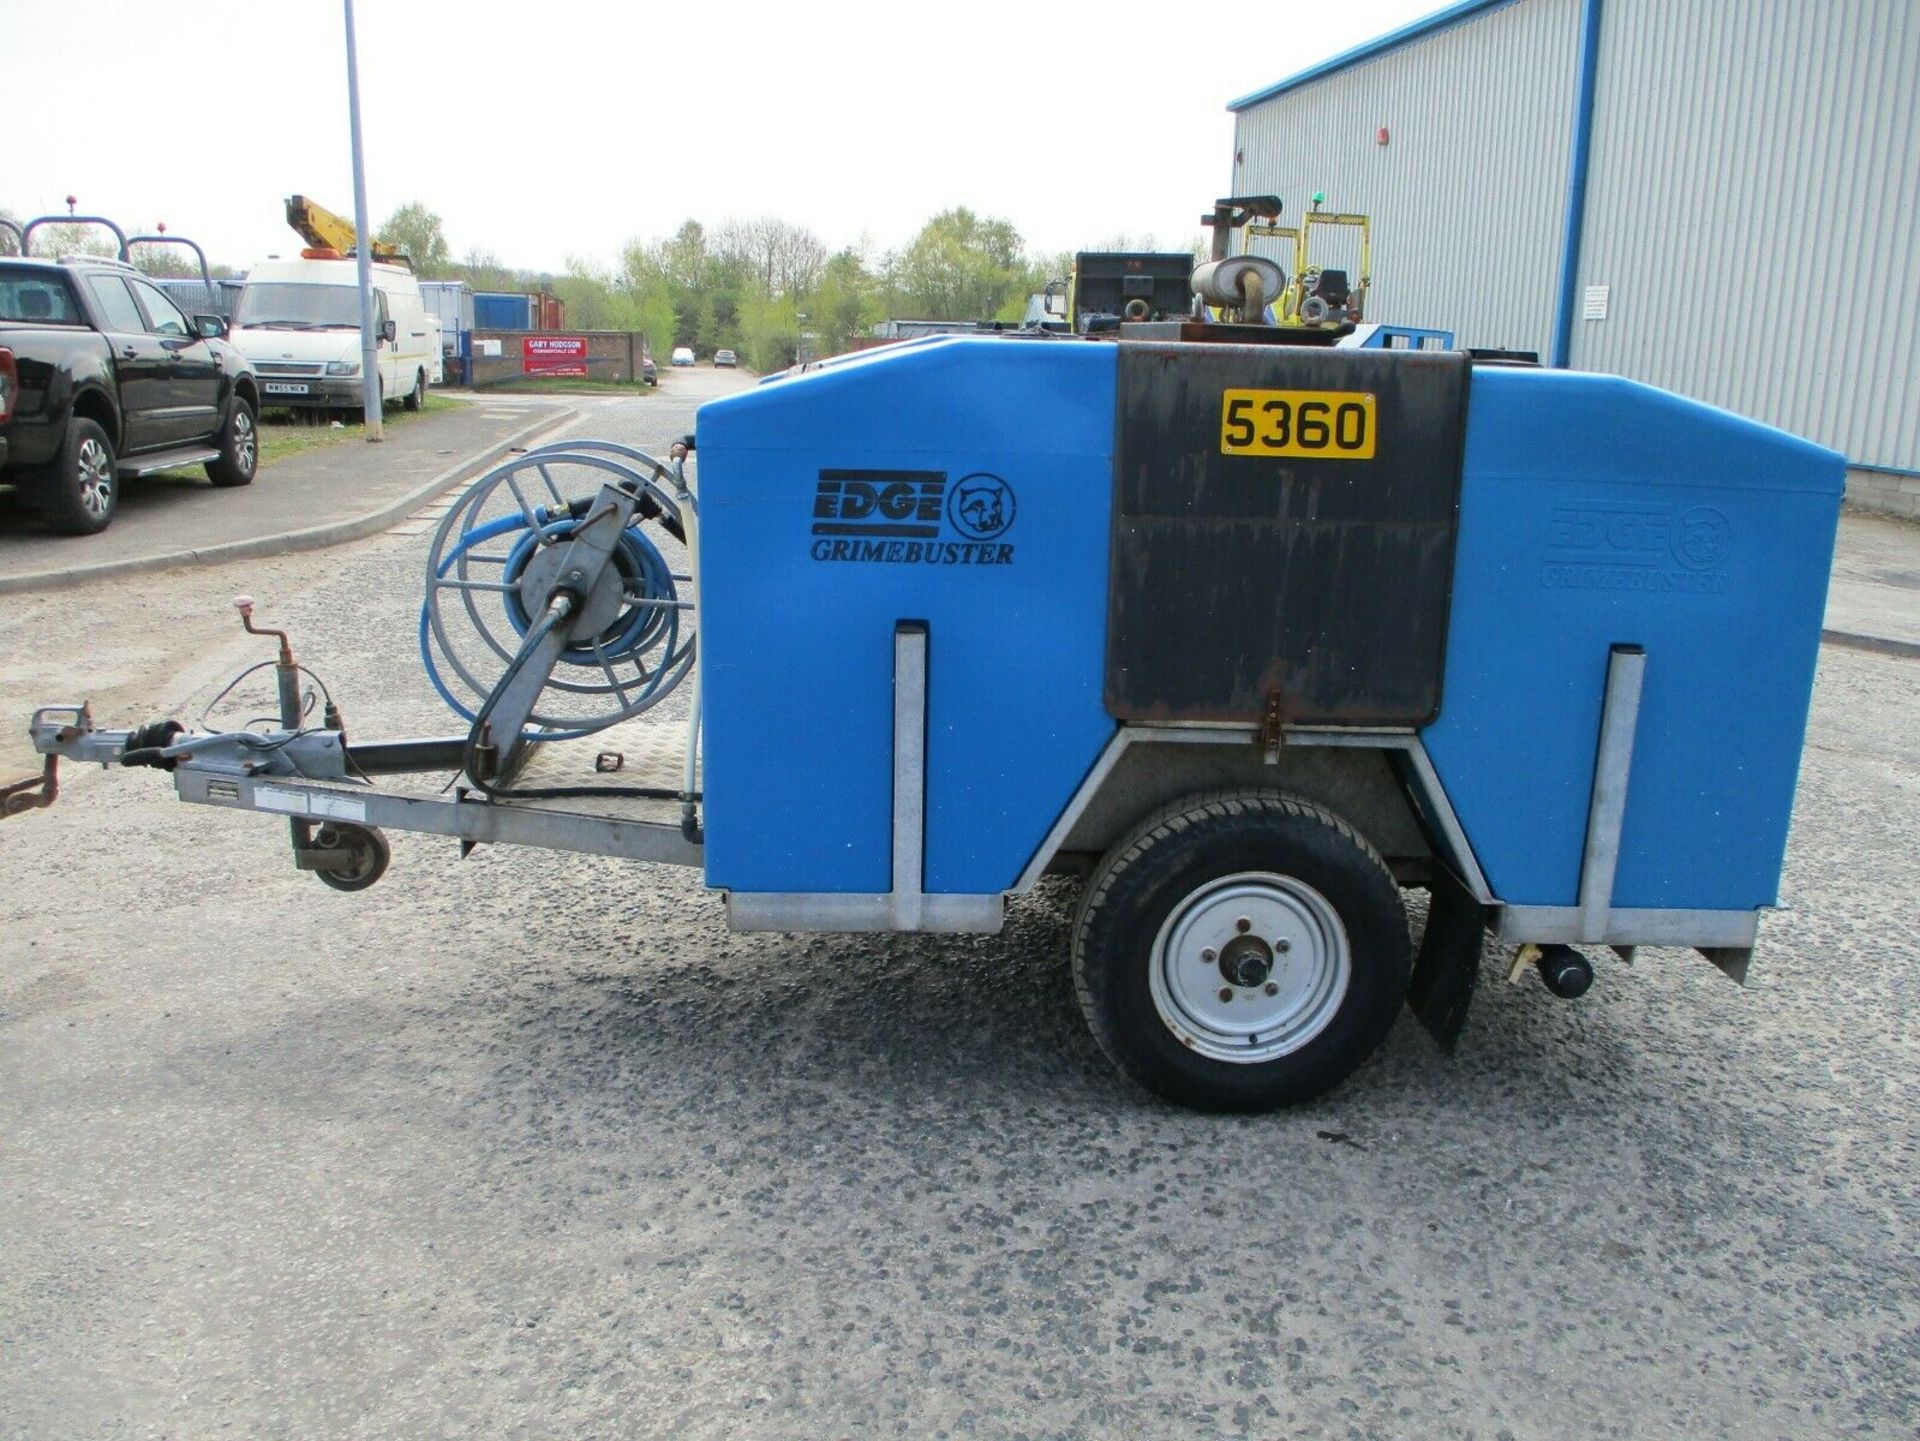 Edge Grime Buster Towable Pressure Washer - Image 3 of 7